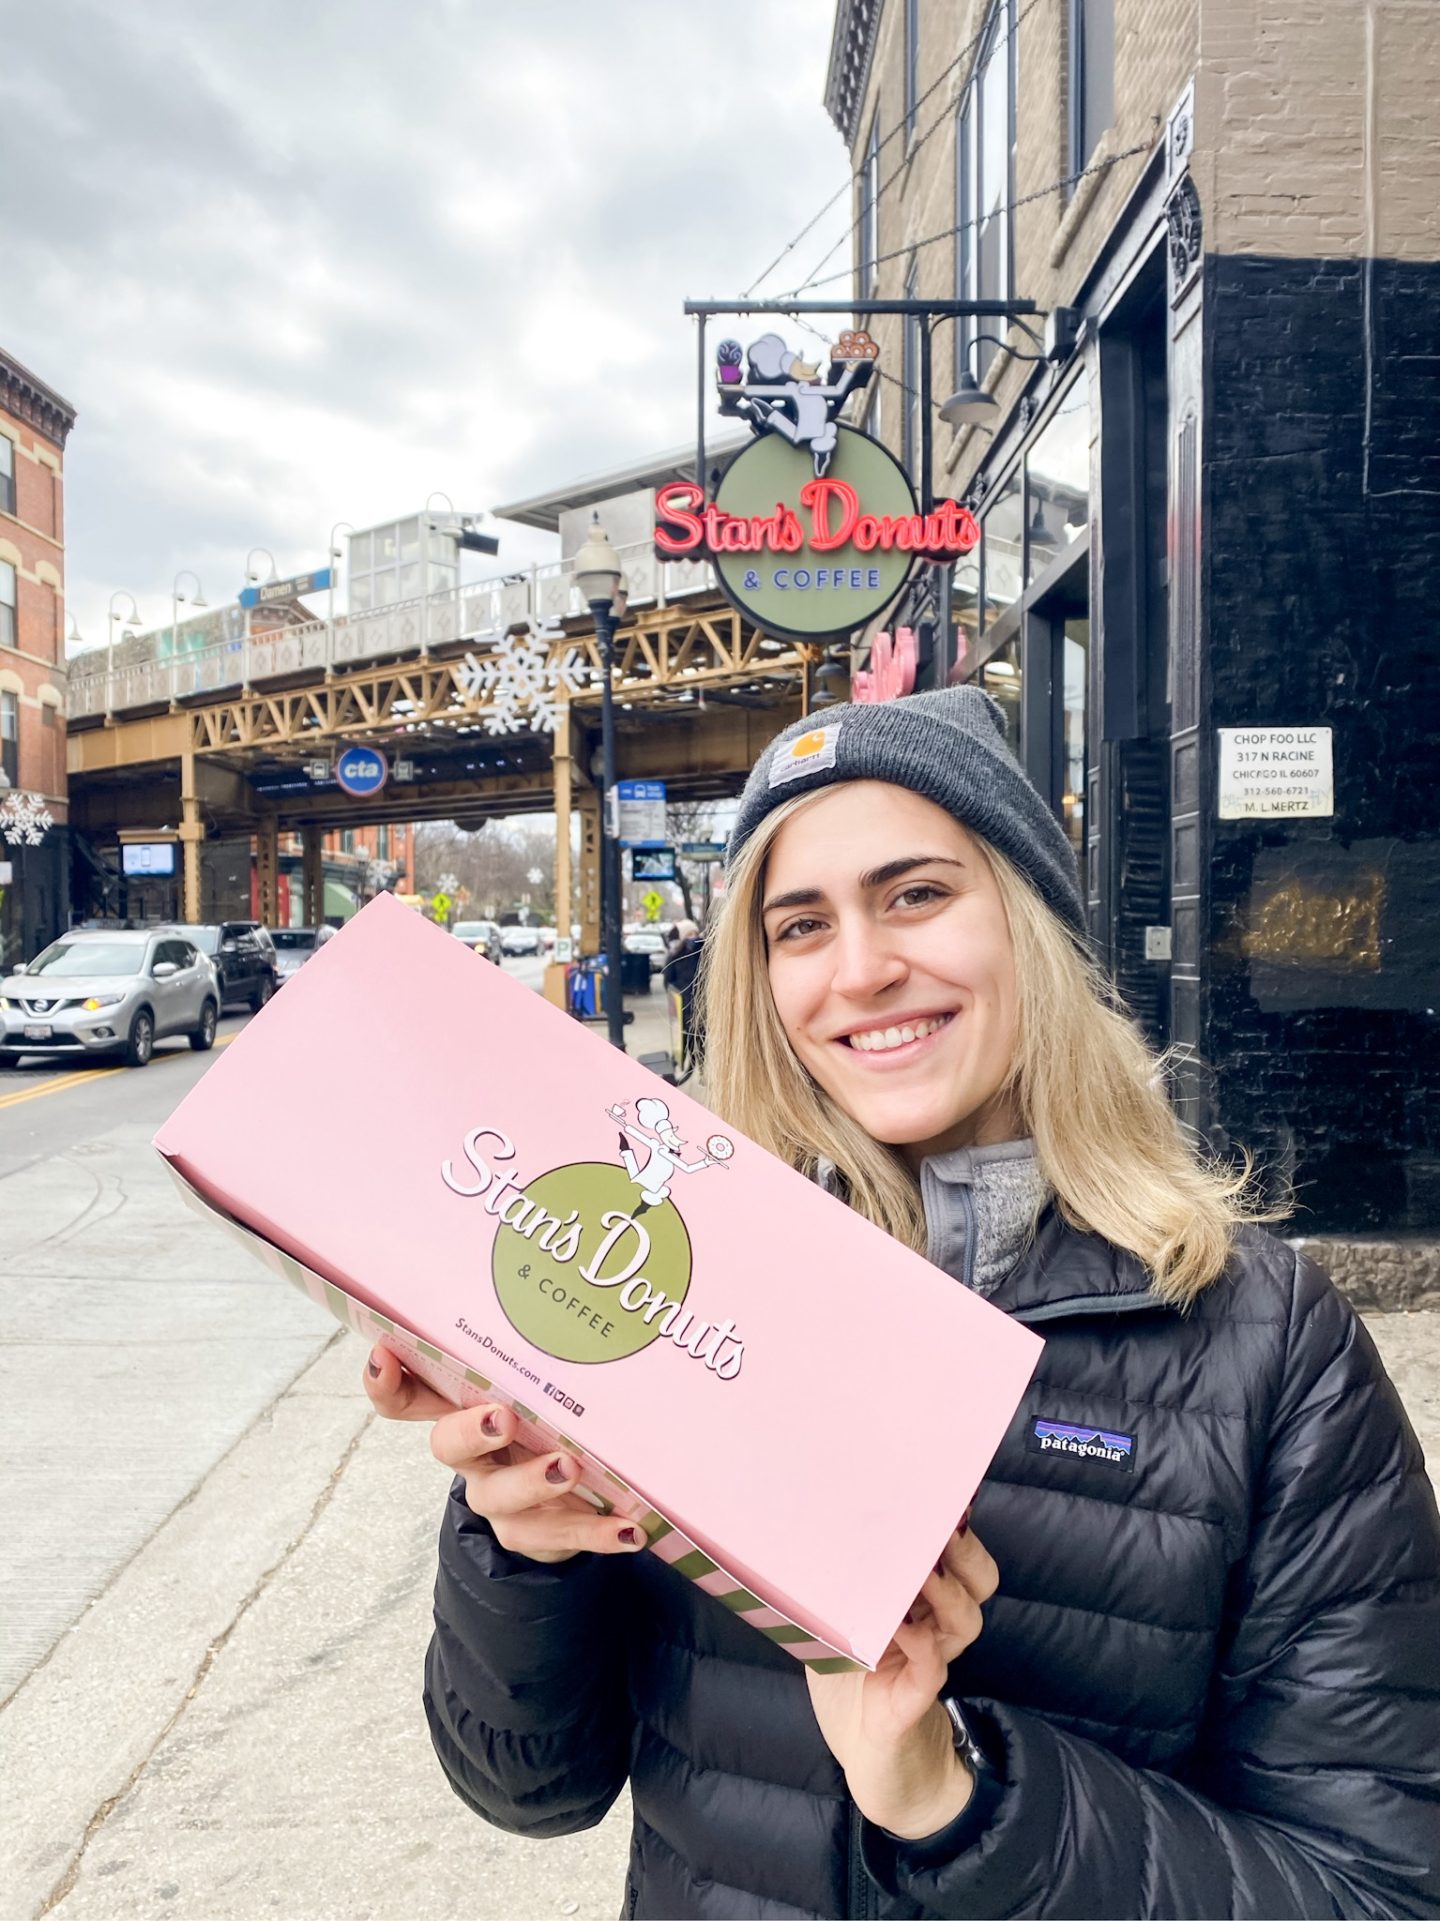 stans donuts in chicago